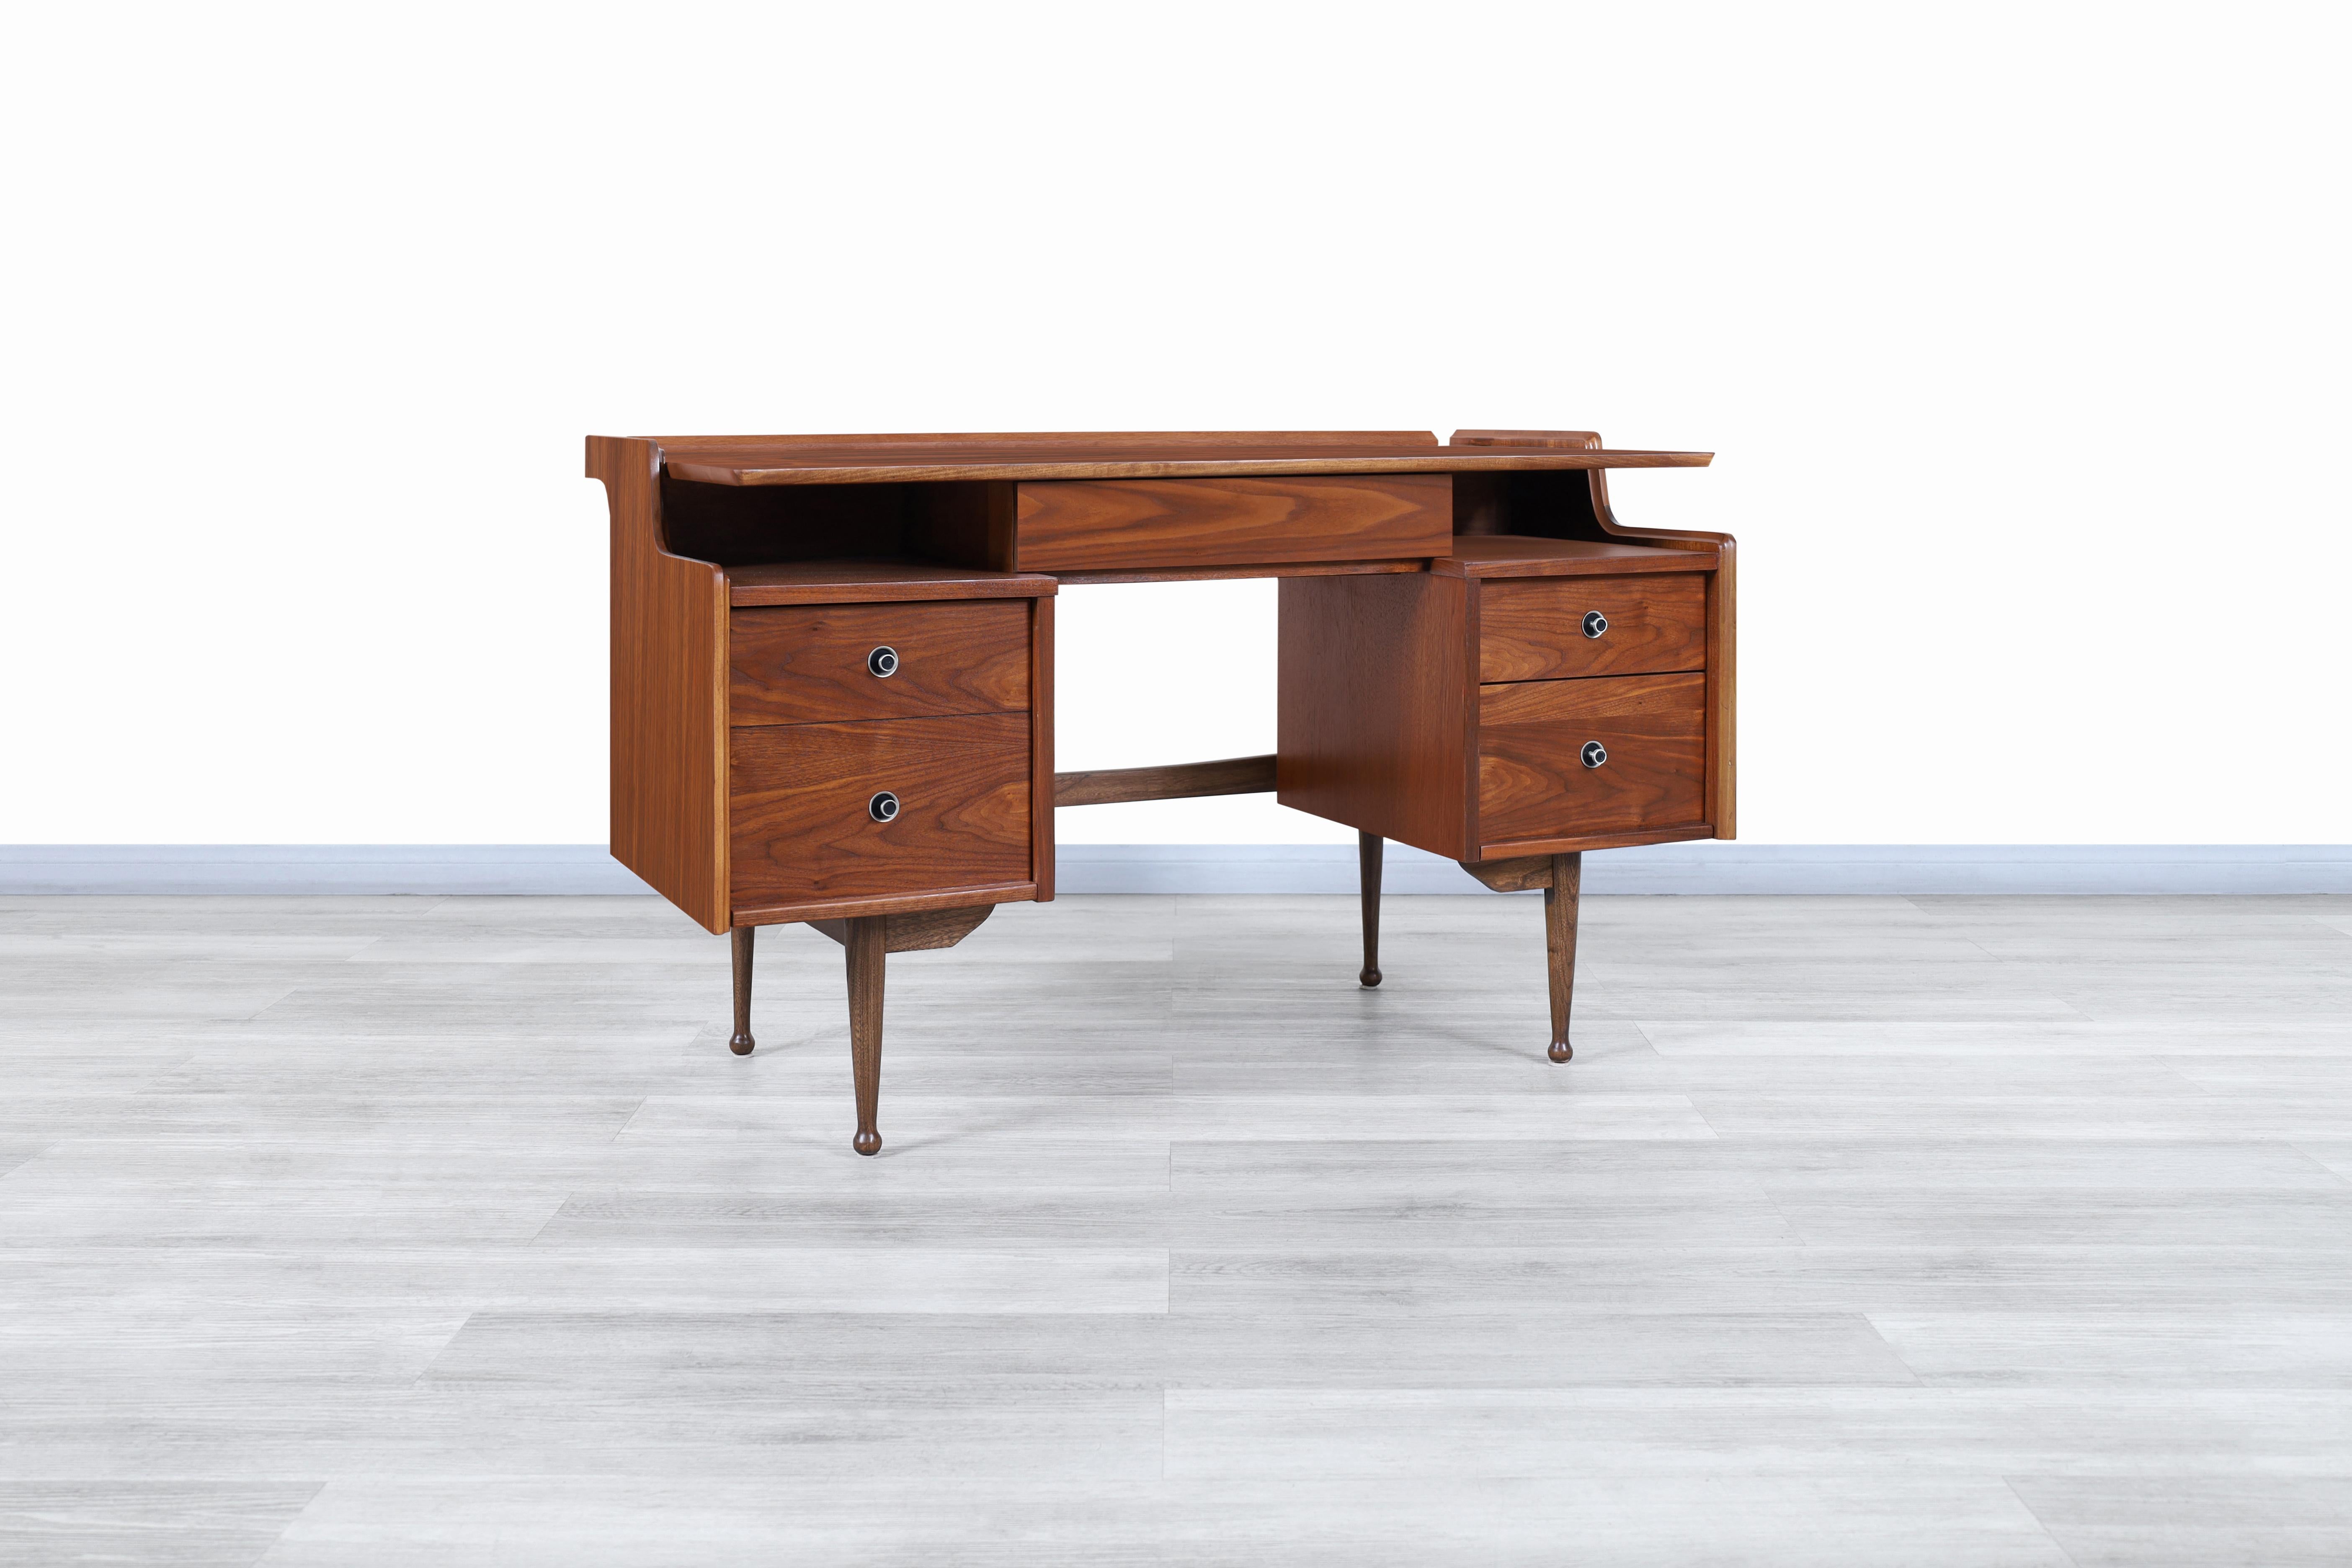 Fabulous Mid-Century Modern walnut “Mainline” desk by Hooker Furniture in the United States, circa 1960s. This desk has been built from the highest quality walnut wood. It has a design that focuses on offering a pleasant user experience but stands